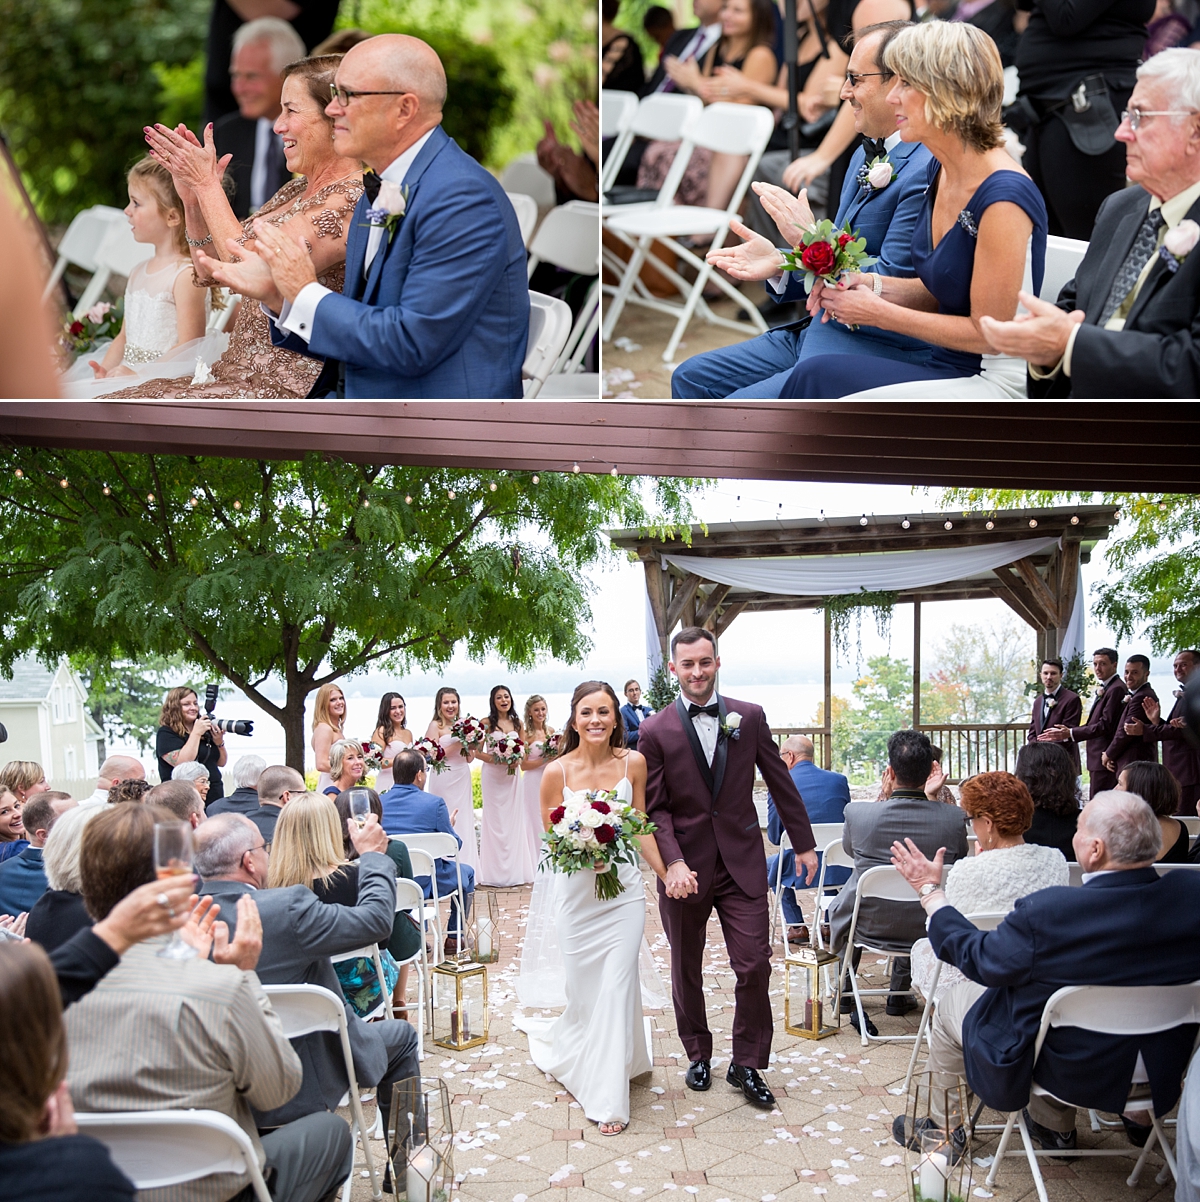 bride and groom are pronounced husband and wife, parents celebrate, chantelle marie lakehouse and celebration venue, sarah heppell photography